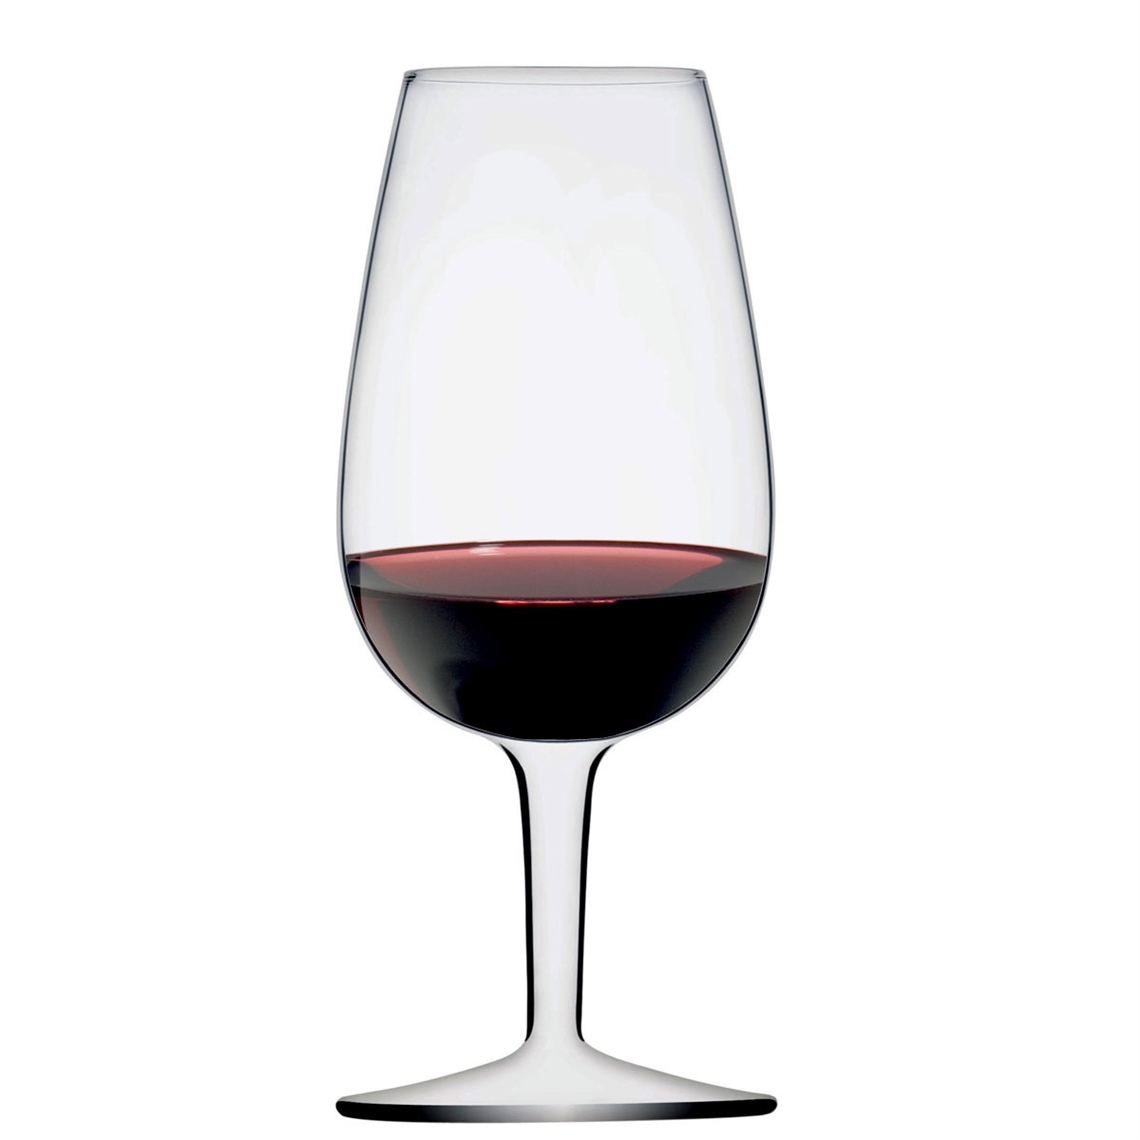 View more how to word an invitation for a wine tasting evening from our Wine Tasting Glasses range